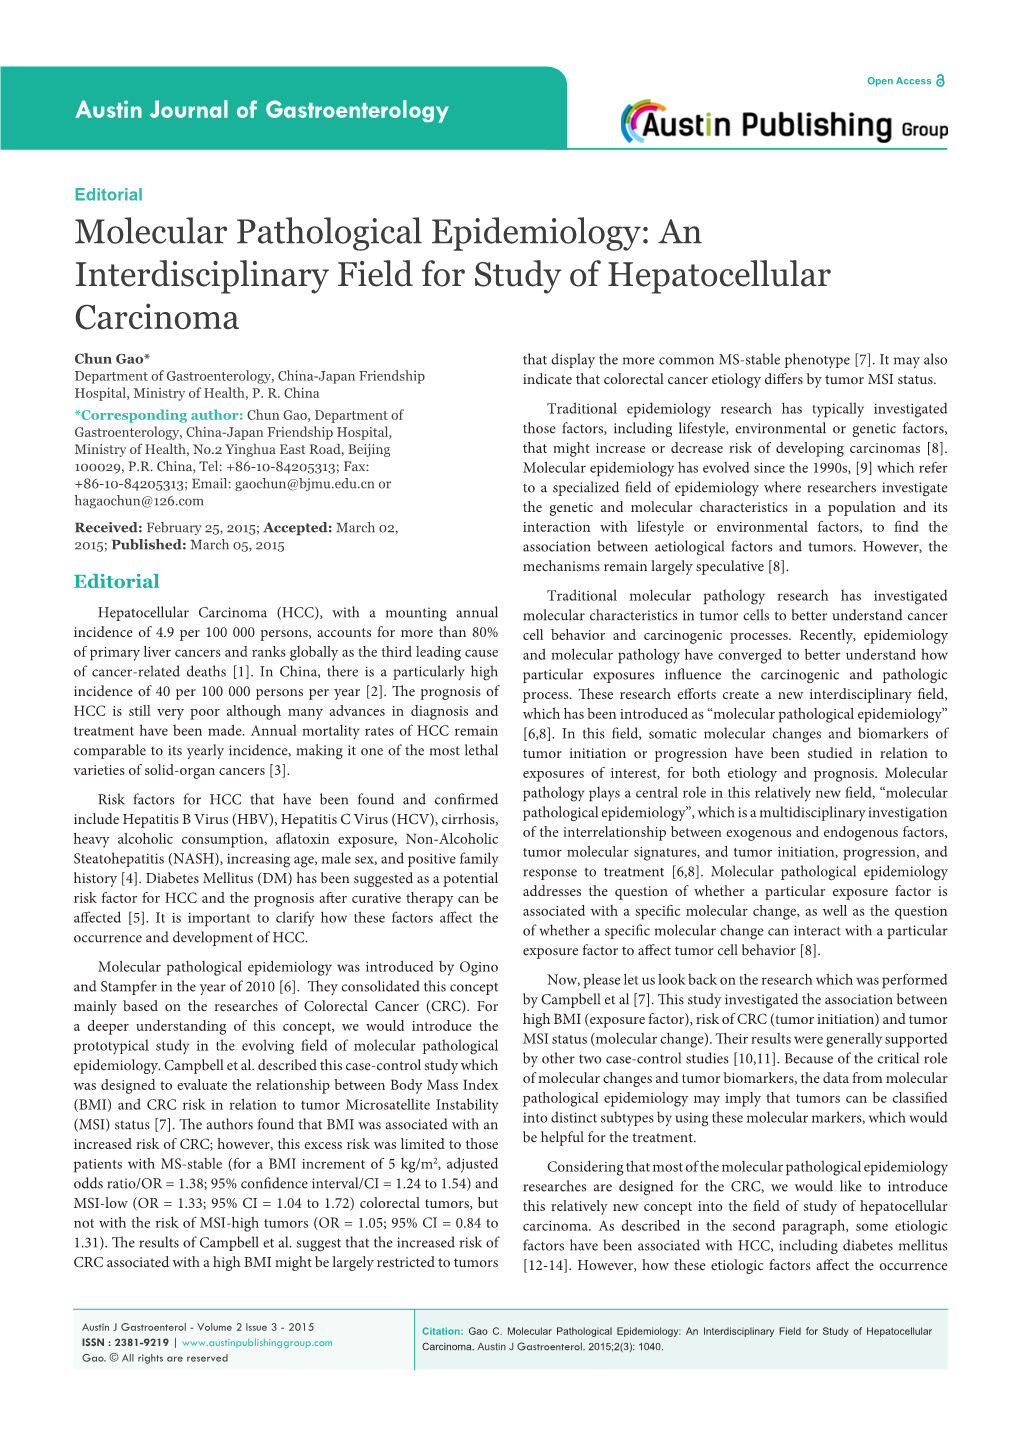 Molecular Pathological Epidemiology: an Interdisciplinary Field for Study of Hepatocellular Carcinoma Chun Gao* That Display the More Common MS-Stable Phenotype [7]